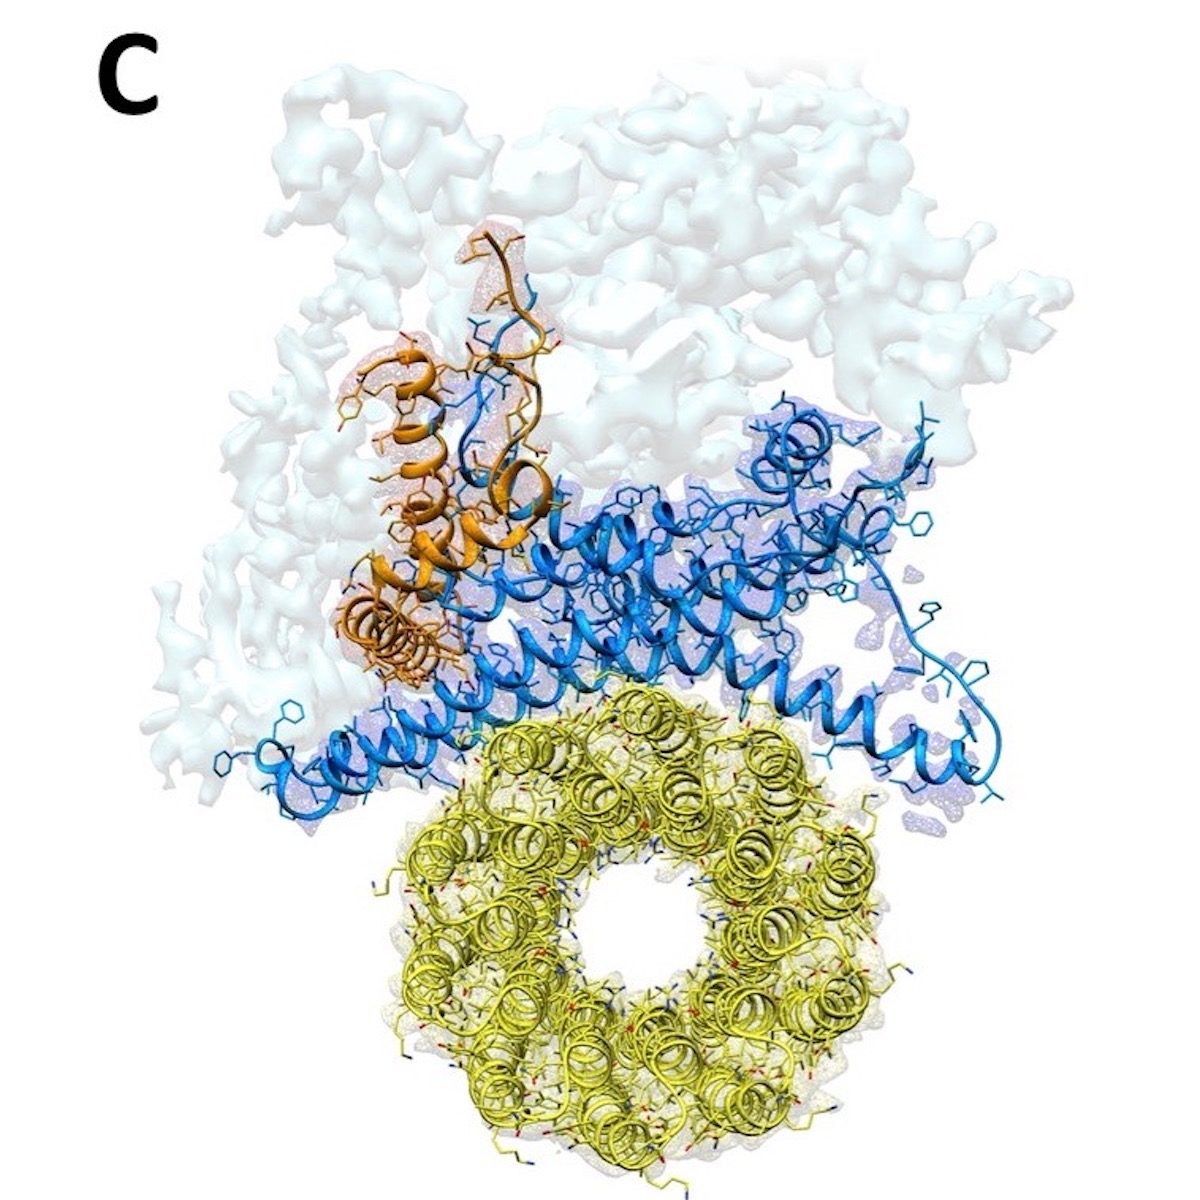 atp synthase